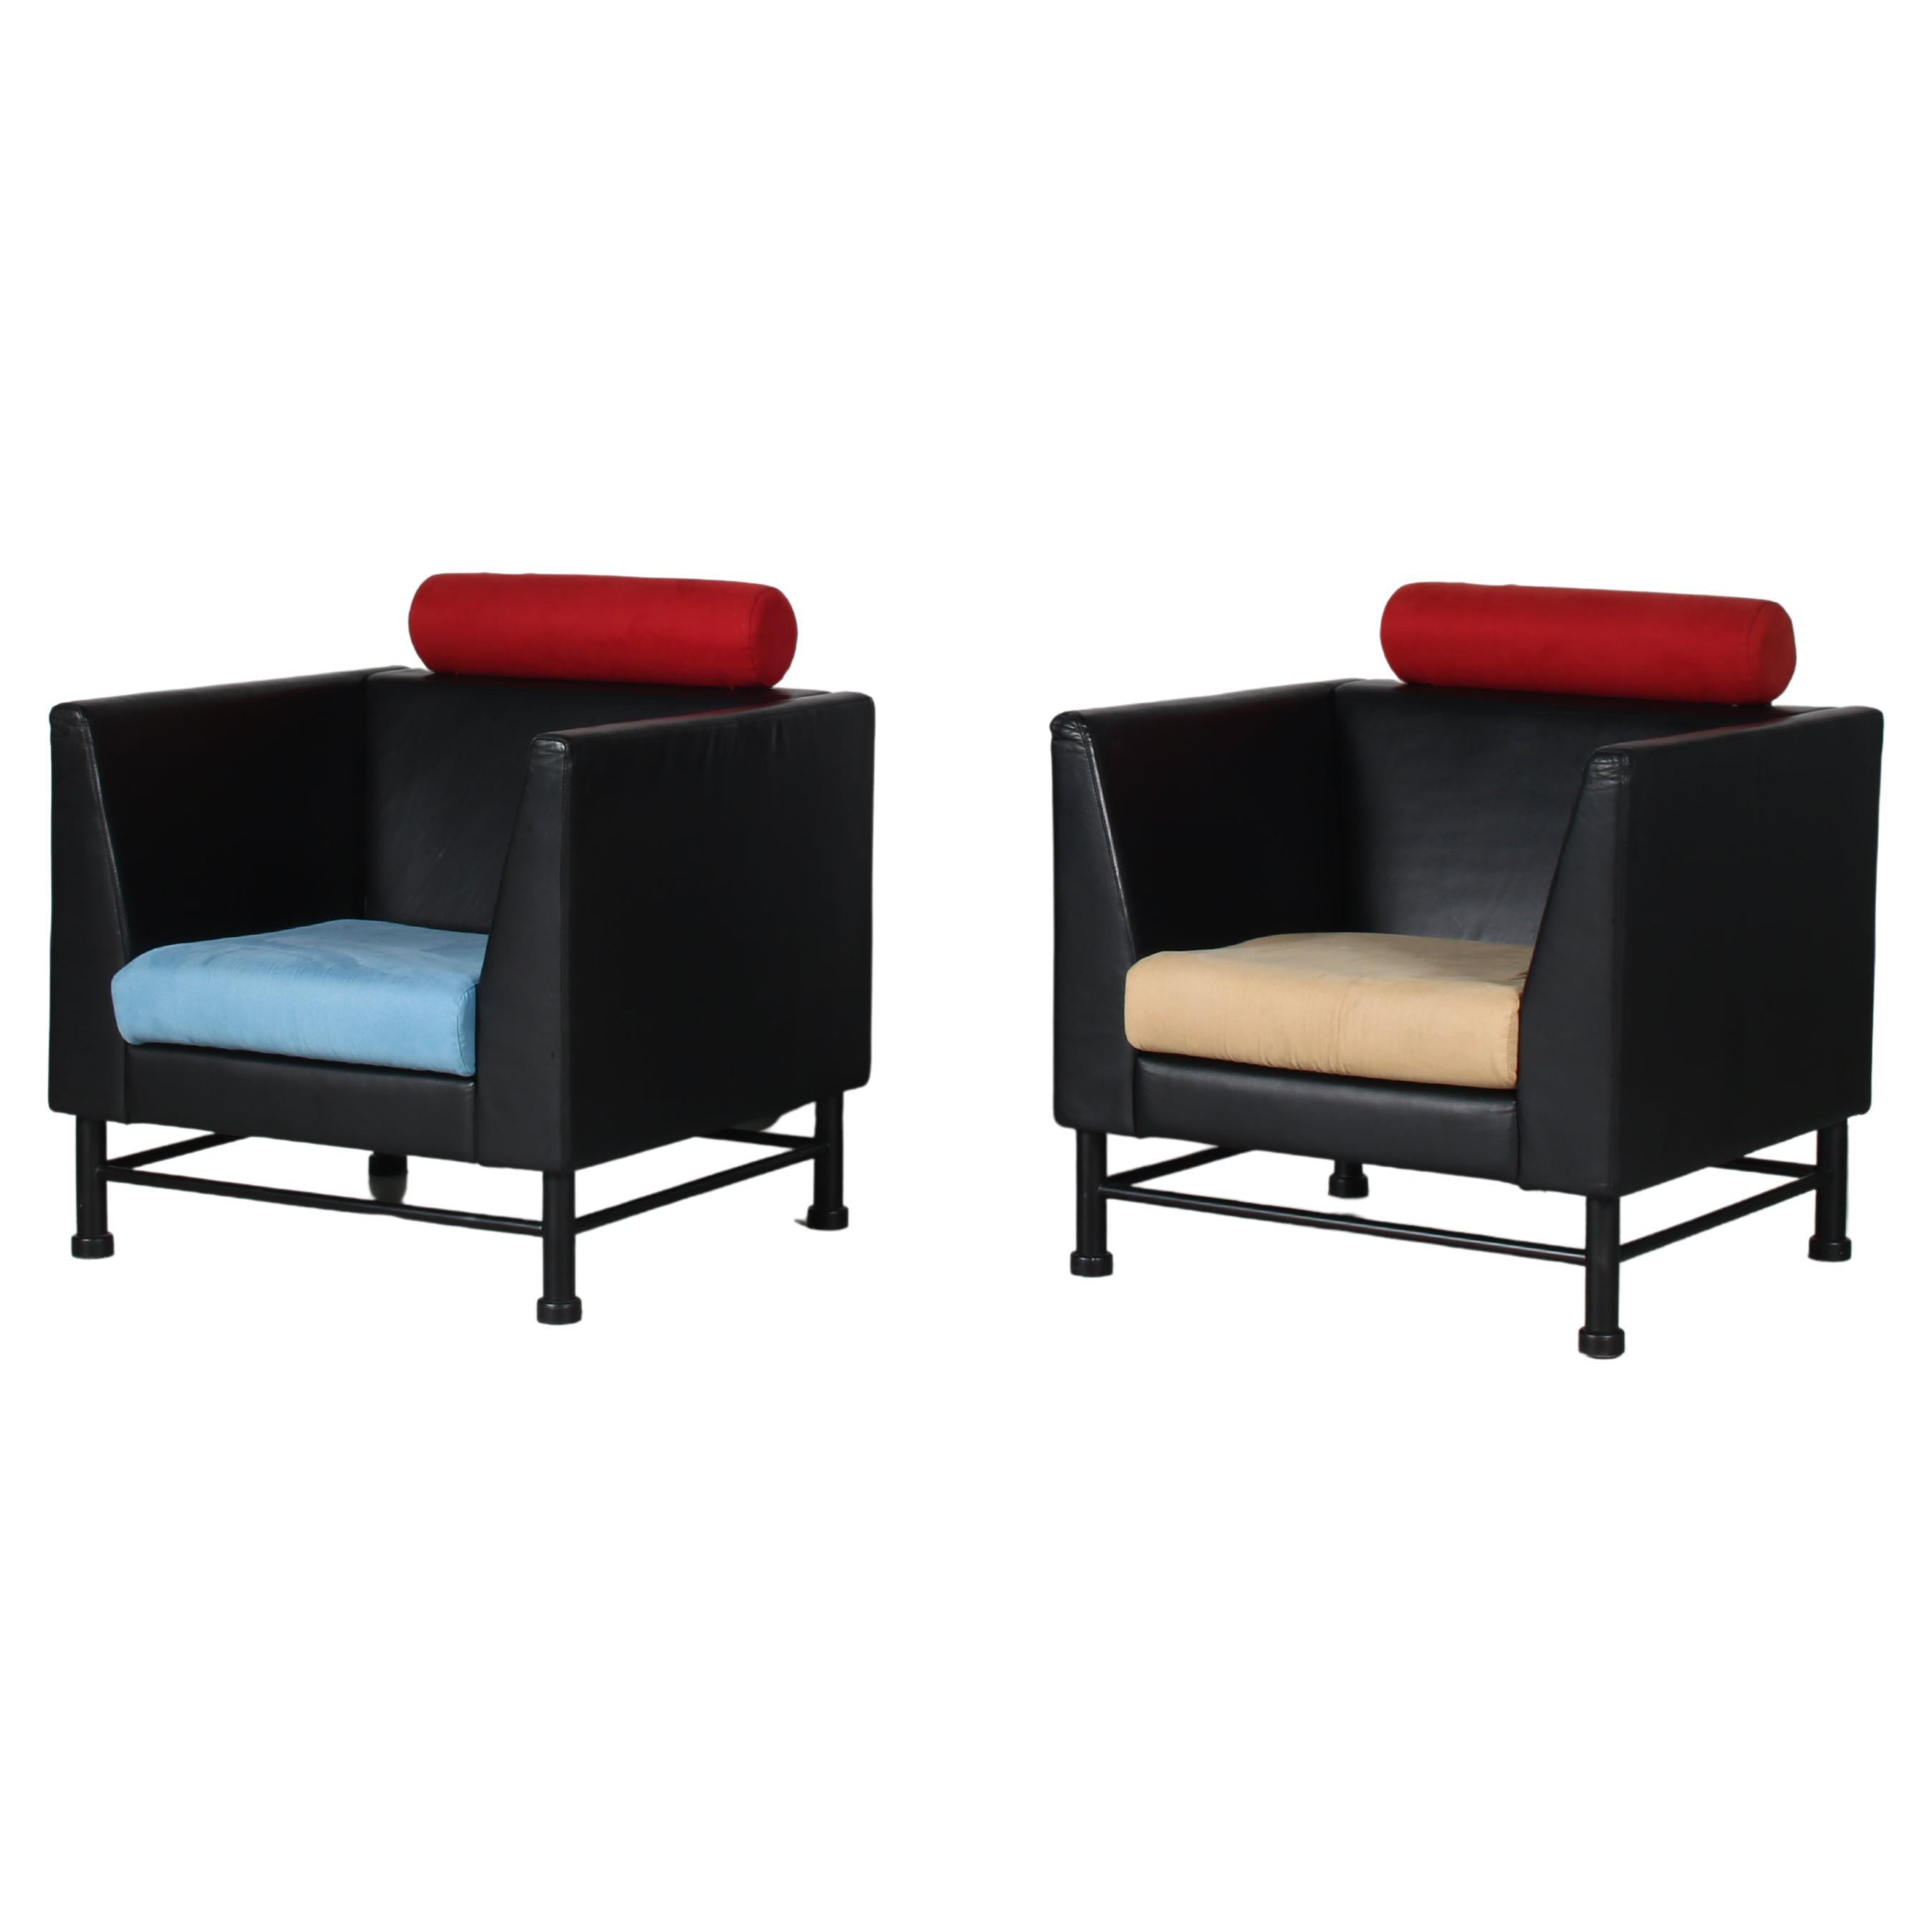 Pair of “East Side” Chairs by Ettore Sottsass for Knoll International, USA, 1980